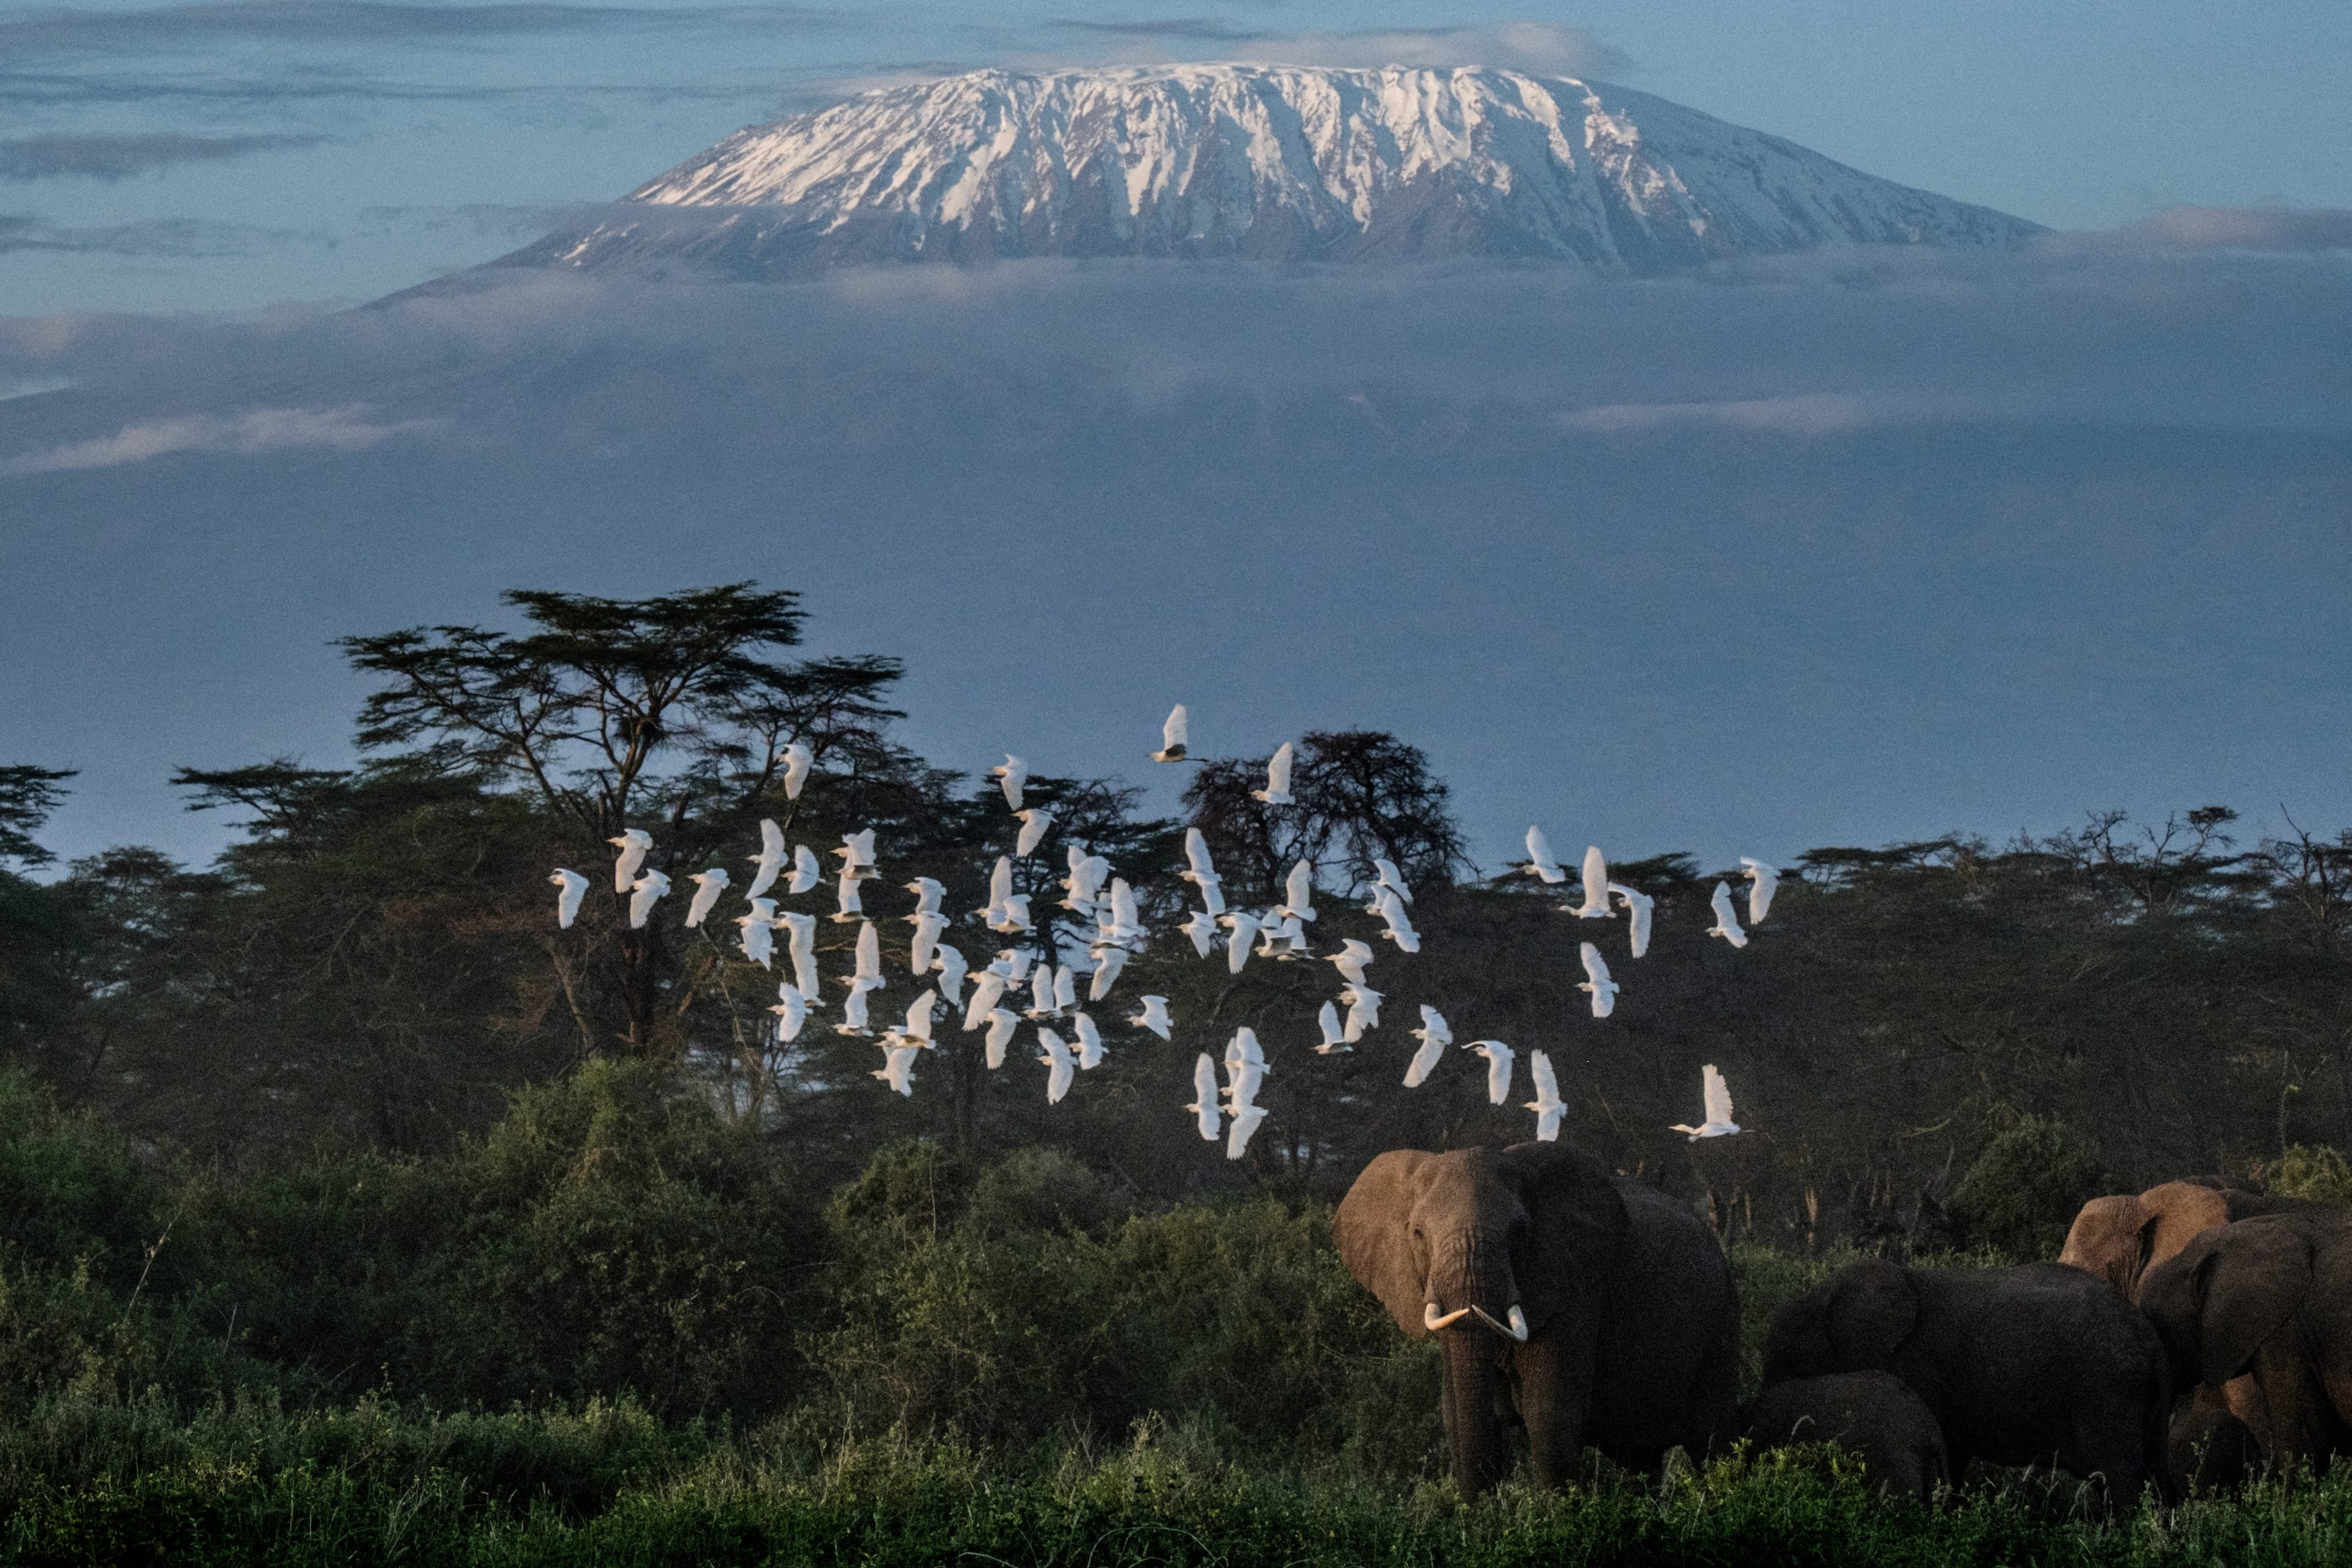 Elephants graze with a view of the snow-capped Mount Kilimanjaro in the background. At 5,895m (19,340 feet), Kilimanjaro is Africa’s highest peak. Photo: AFP